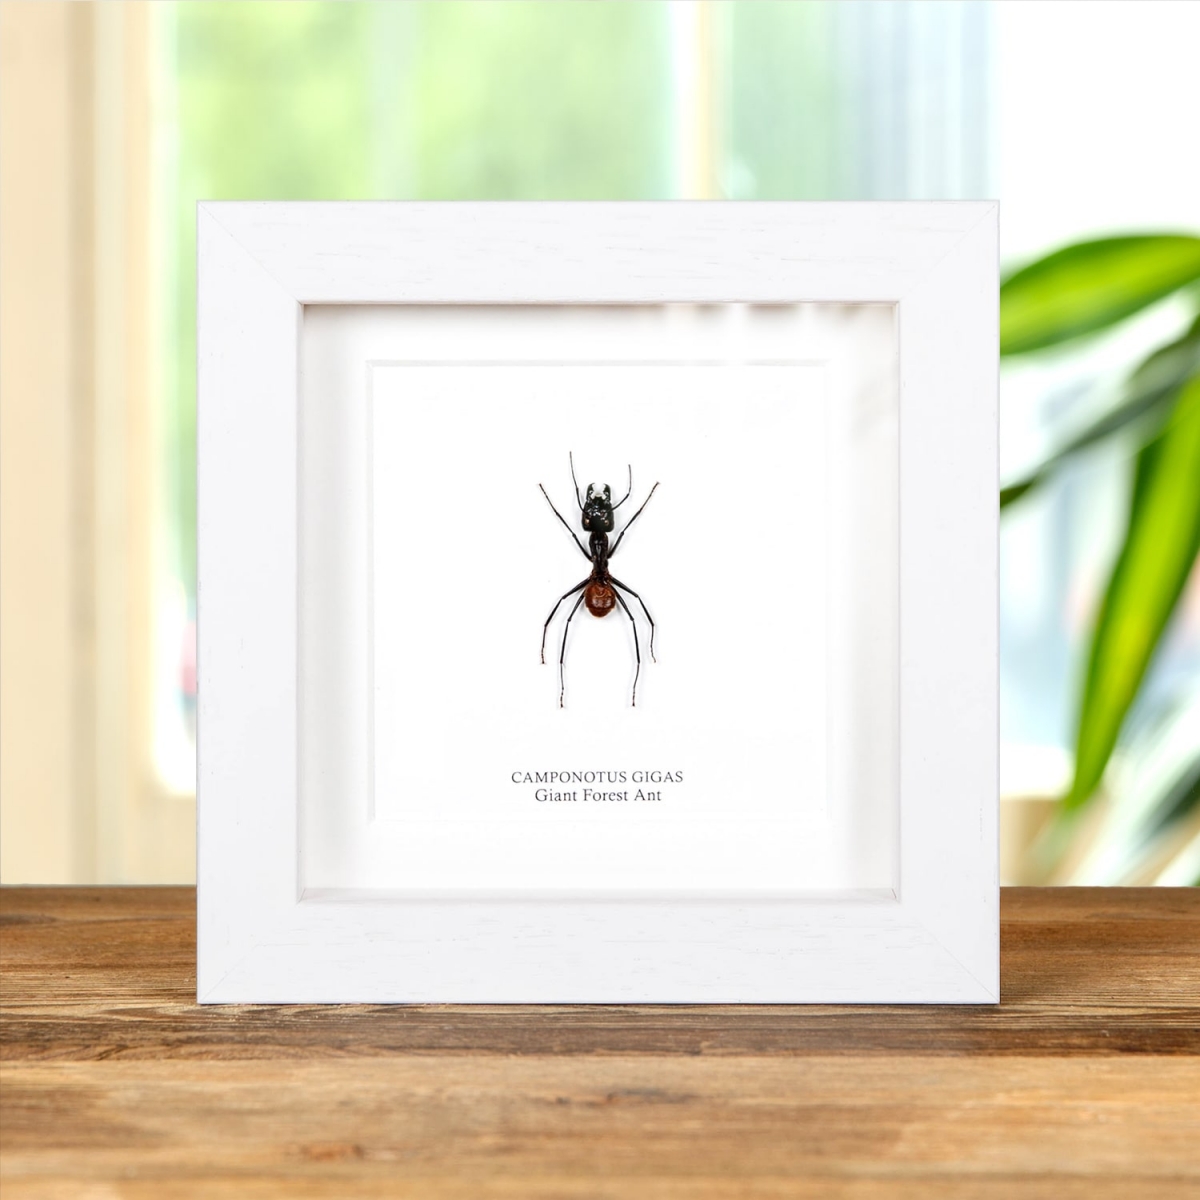 Giant Forest Ant in Box Frame (Camponotus gigas)